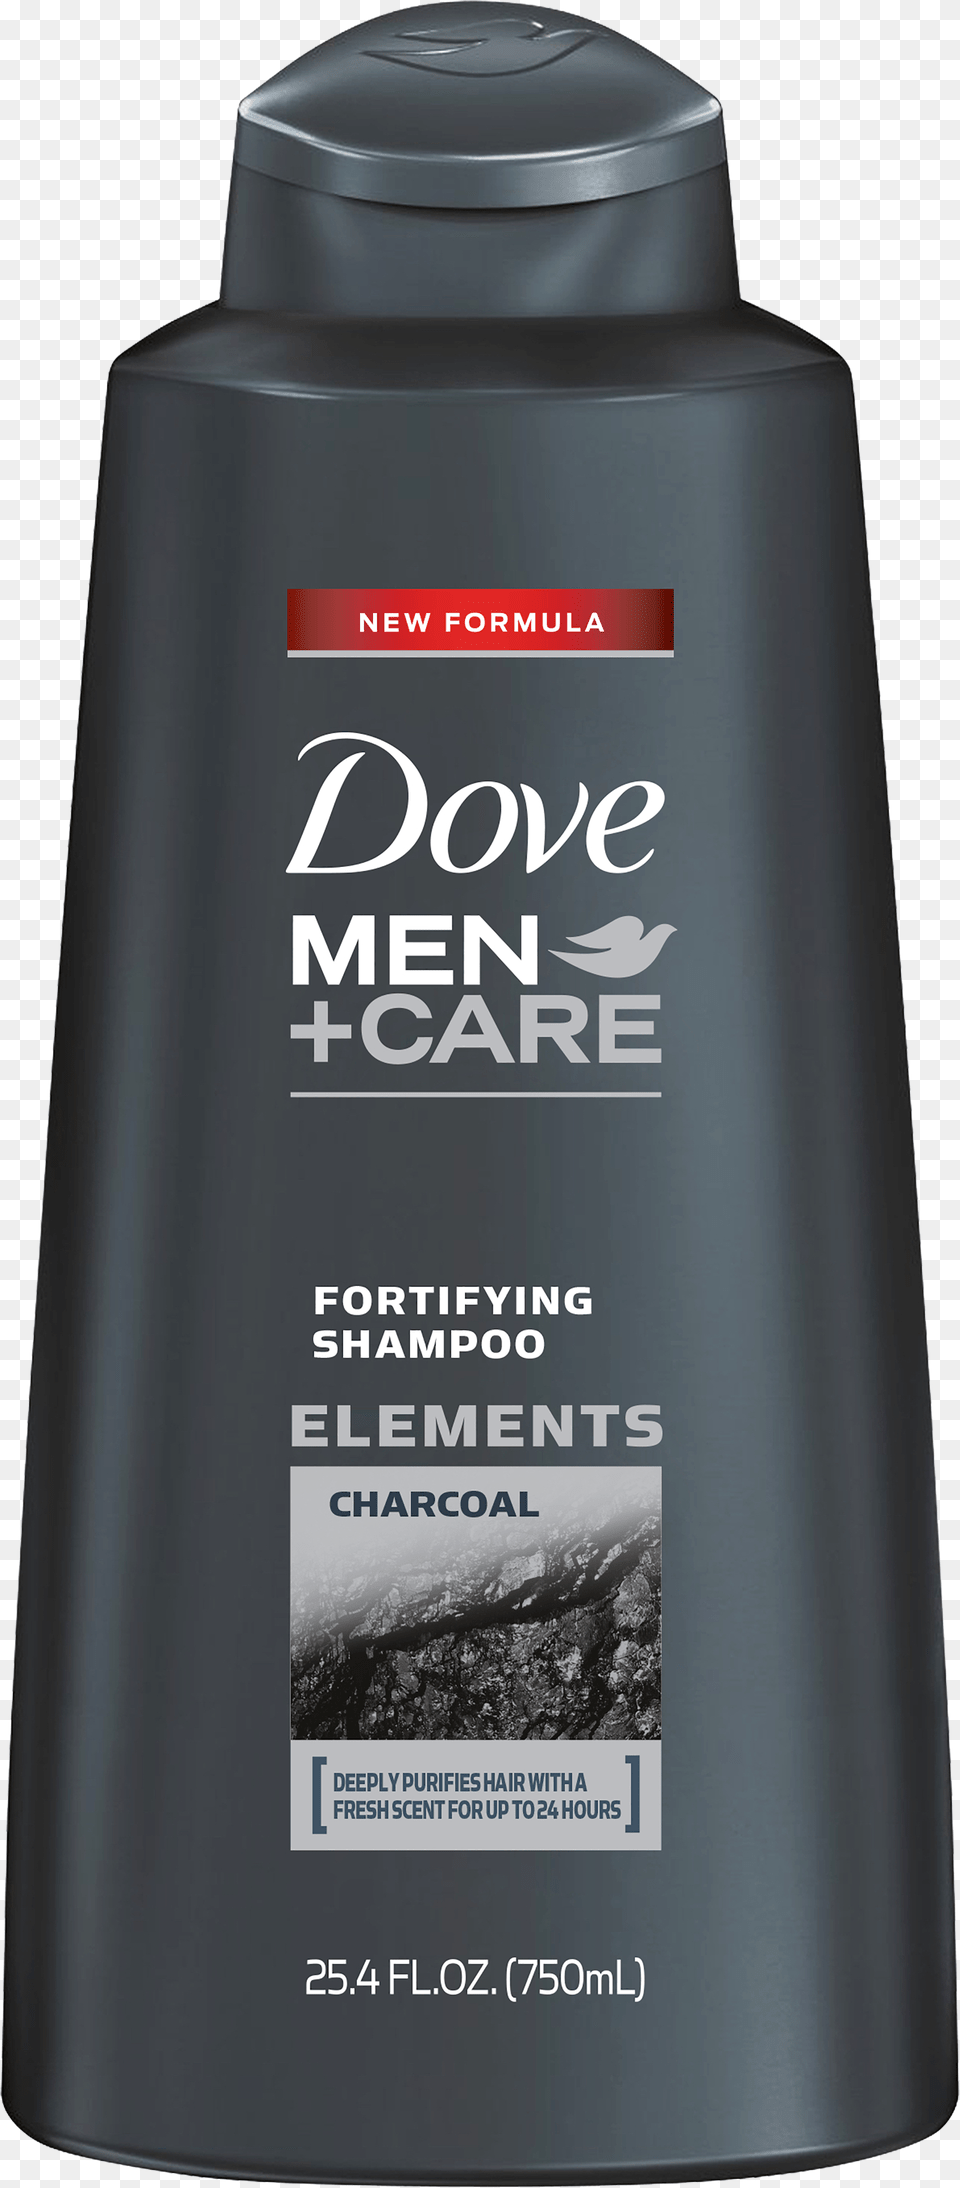 Download Dove Men Care Charcoal Wales Rugby, Bottle, Shampoo, Shaker Free Png